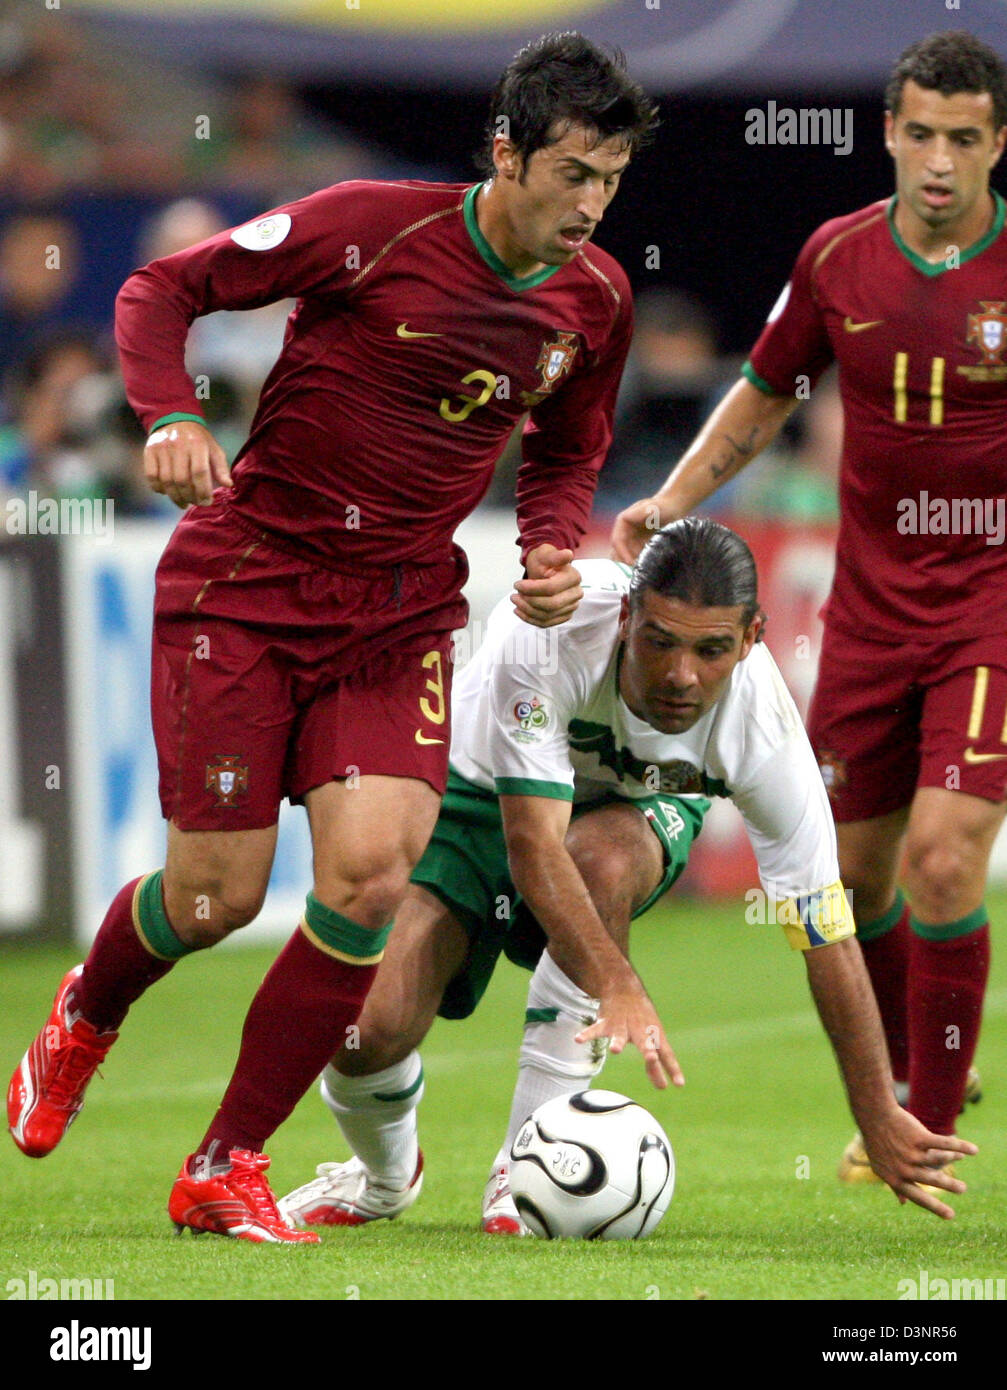 Caneira (L) and Simao Sabrosa (R) from Portugal and Rafael Marquez (C) from Mexico fight for the ball during the group D match of 2006 FIFA World Cup between Portugal and Mexico in Gelsenkirchen, Germany, Wednesday, 21 June 2006. DPA/ROLAND WEIHRAUCH +++ Mobile Services OUT +++ Please refer to FIFA's Terms and Conditions Stock Photo